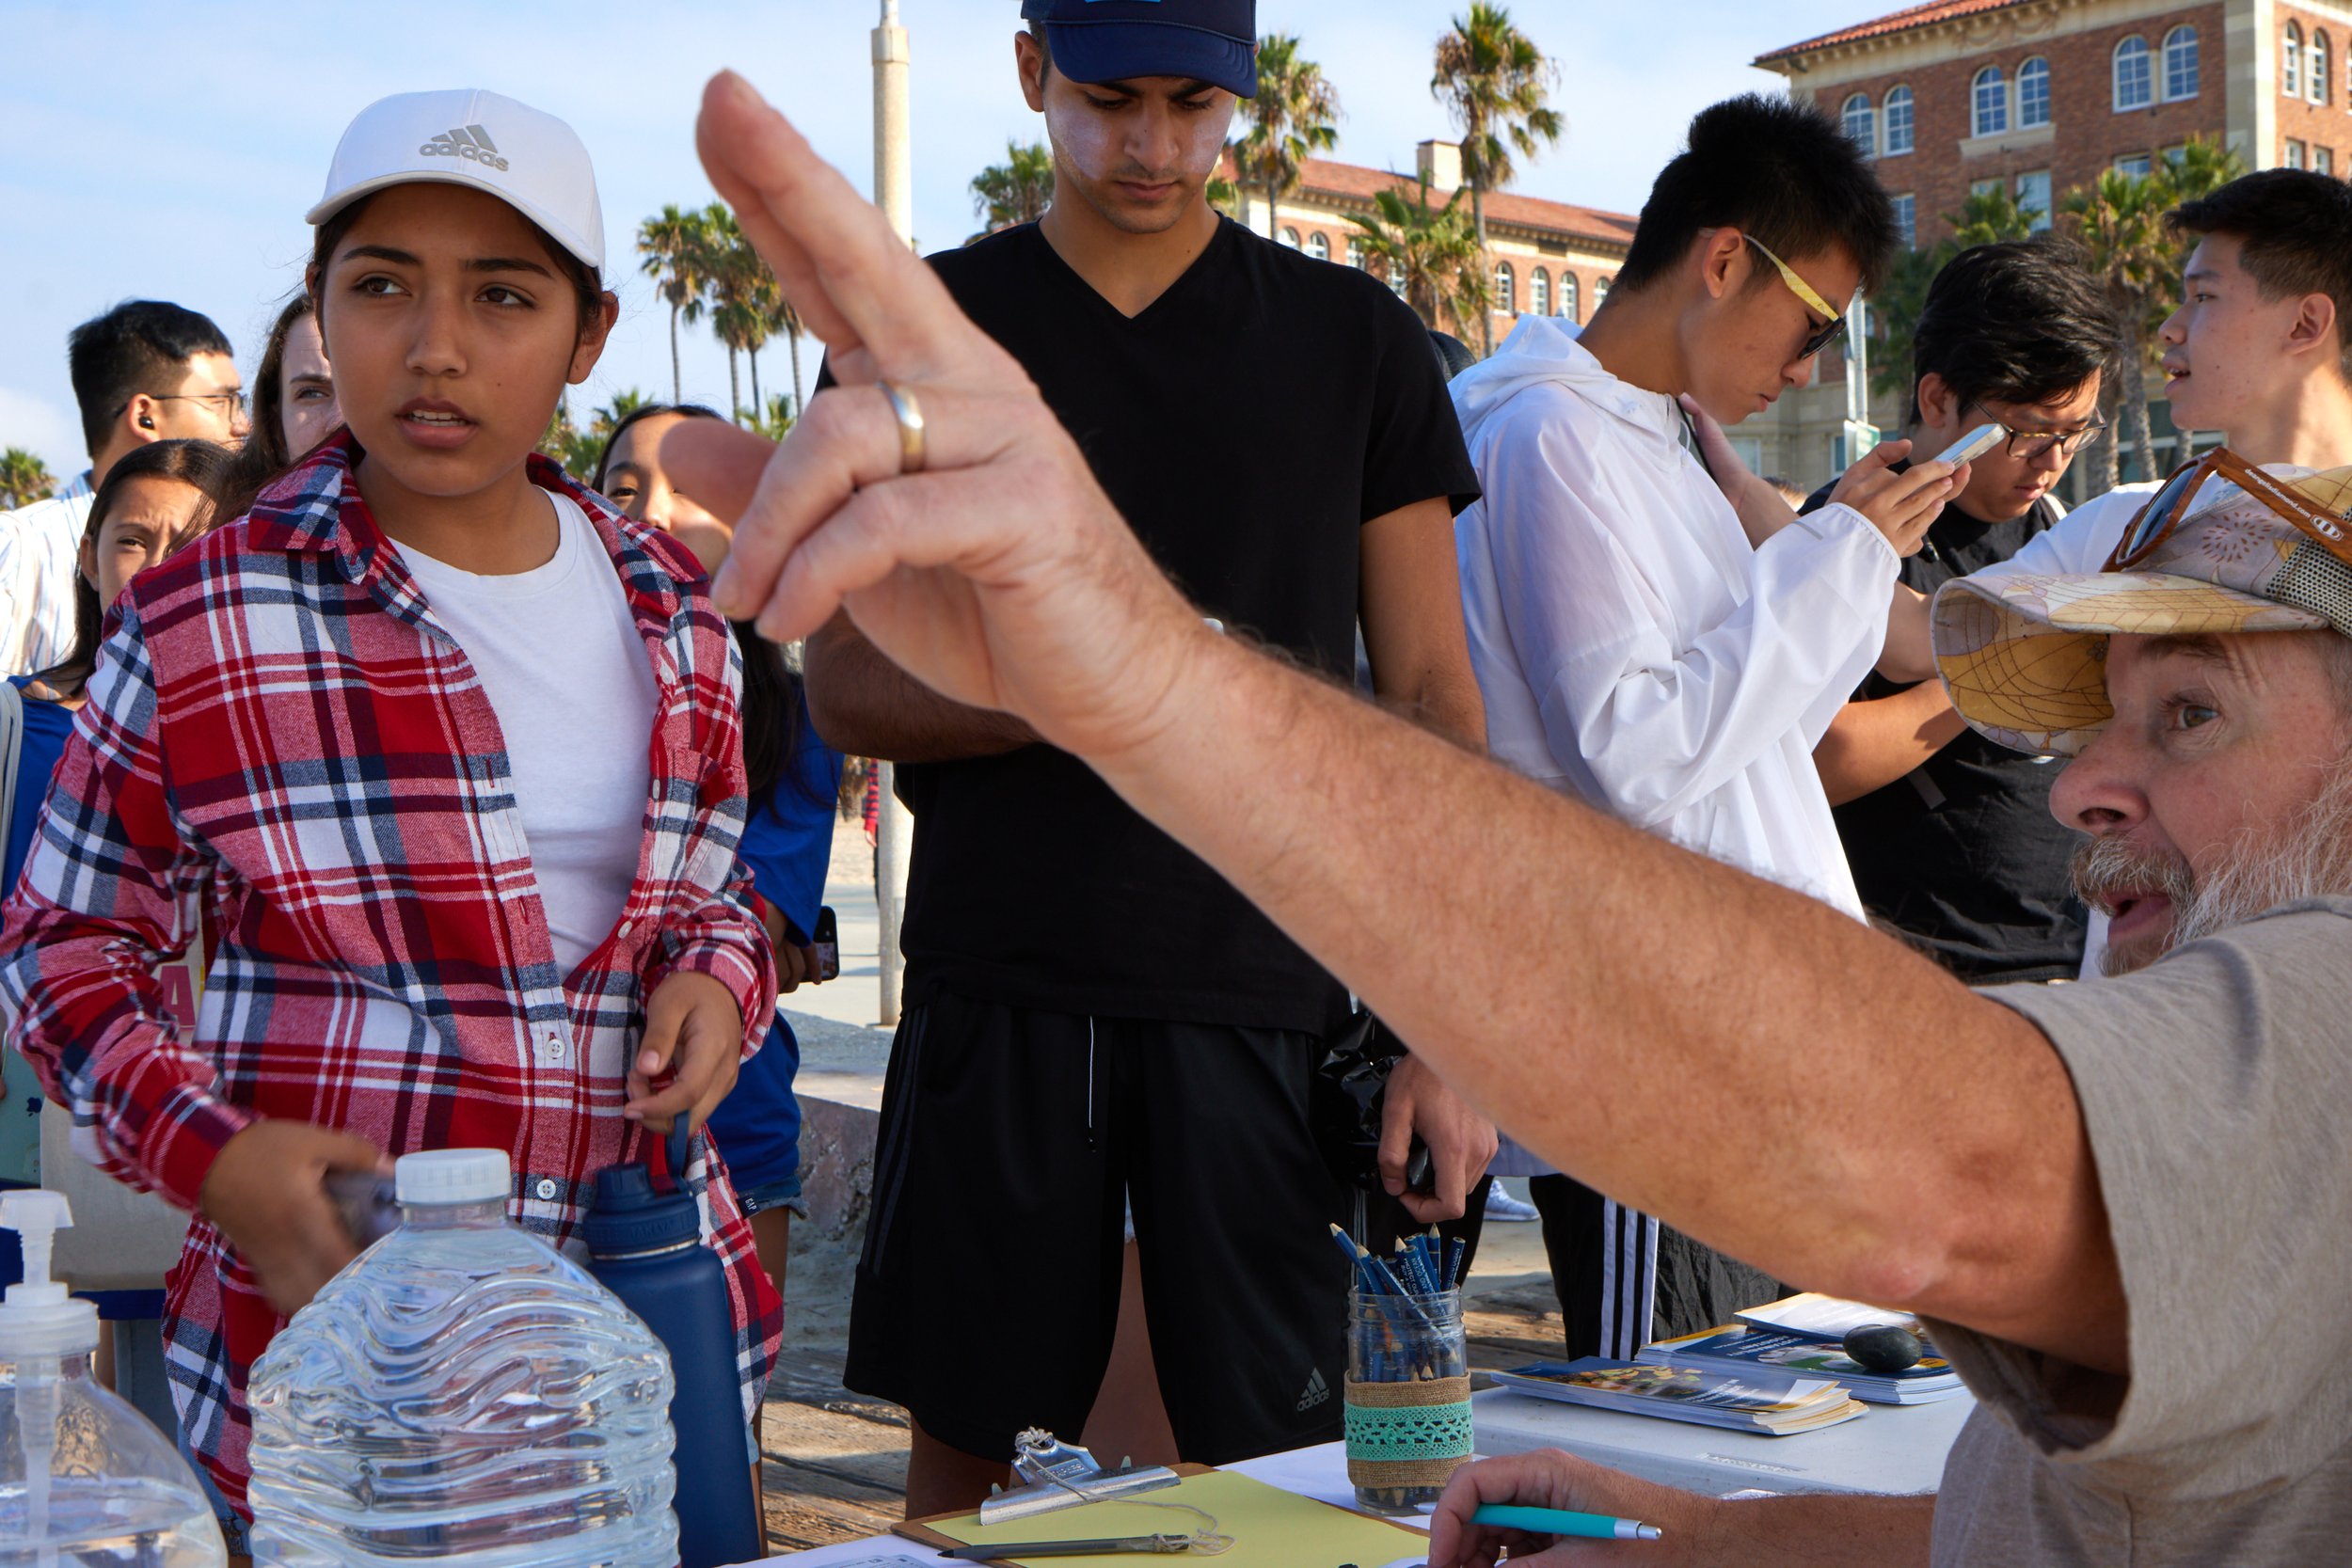  Gene Collins, right, point towards cleaning supplies for Luna, left, during a beach cleanup organized by Santa Monica College Sustainability Center at the Inkwell, Santa Monica, Calif., on Sept. 23, 2023. Luna had just finished signing the waiver fo